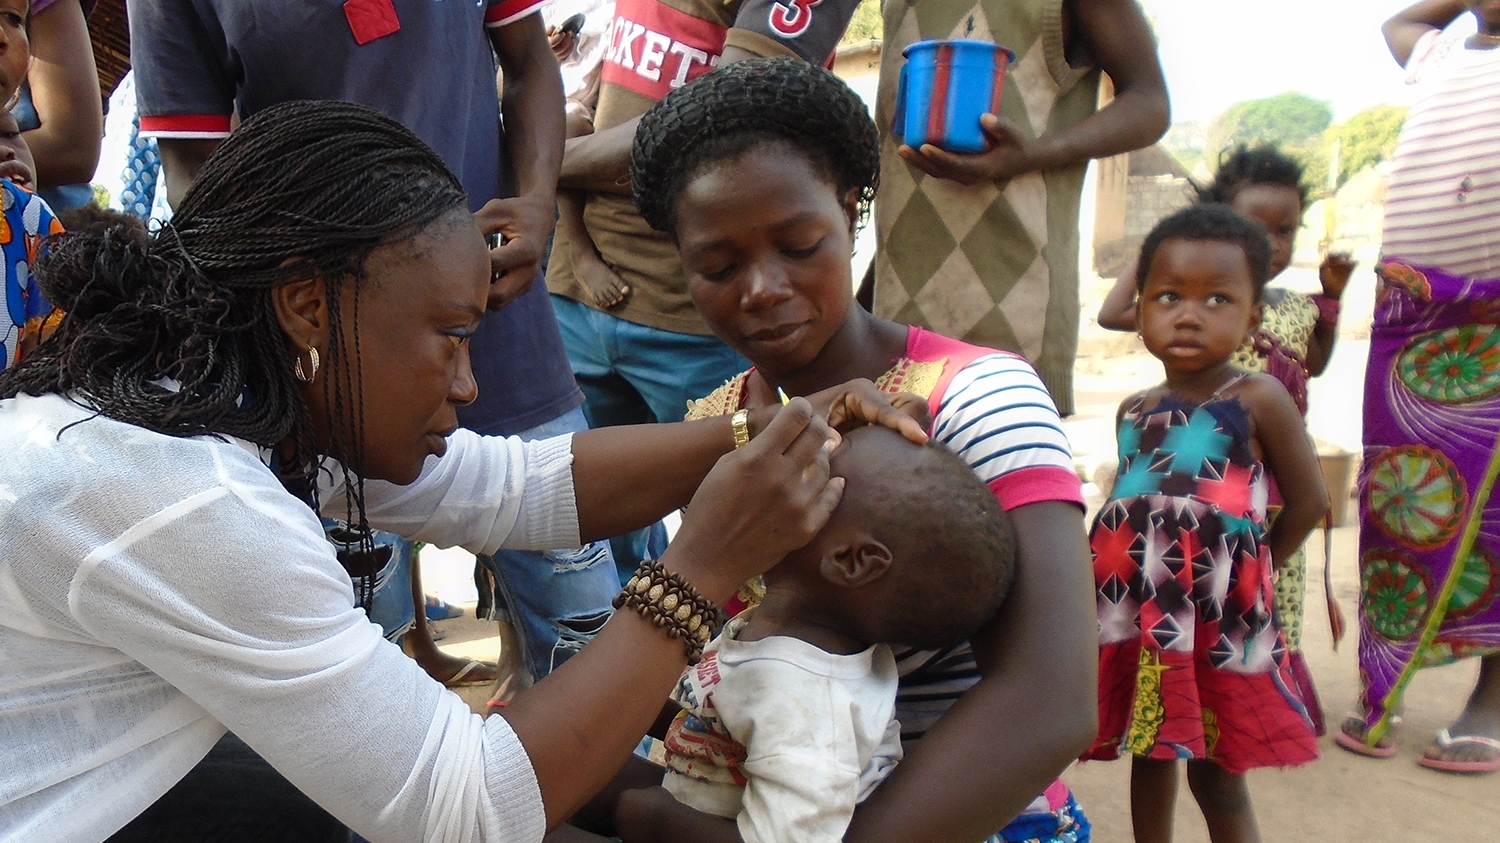 An eye health worker checks a toddler's eyes for trachoma during a community screening.